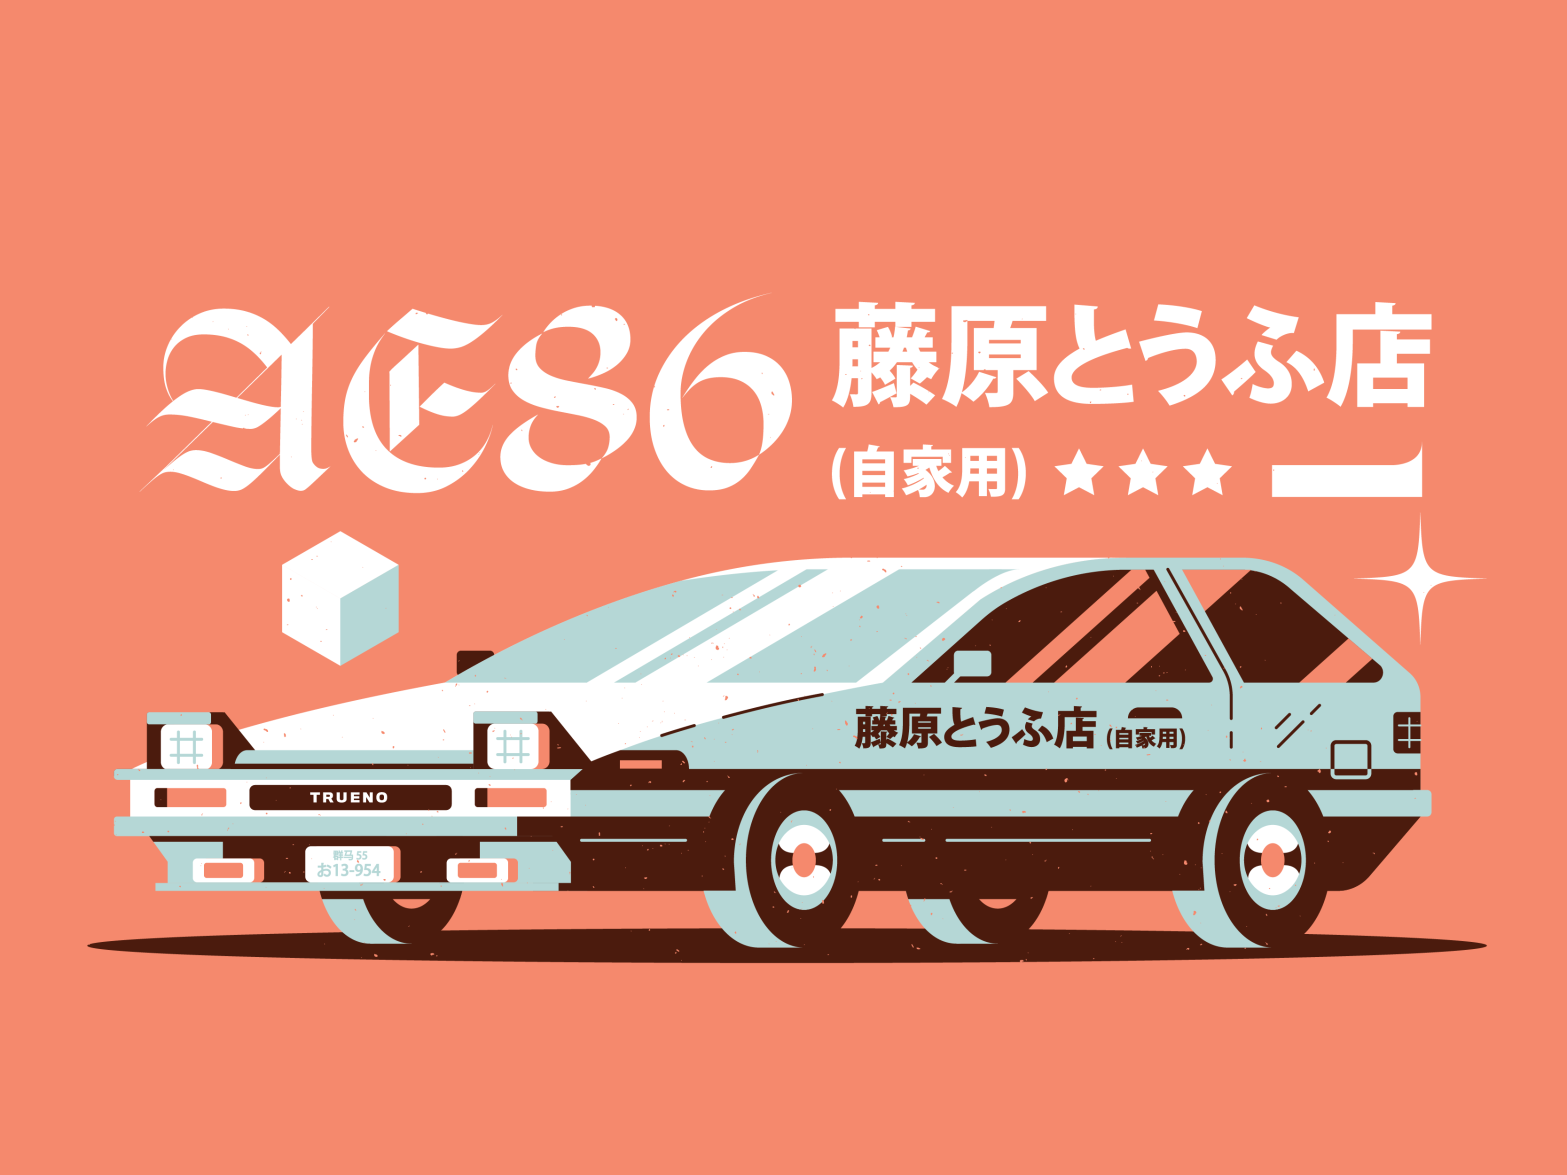 Ae86 - Initial D by Roxanne on Dribbble